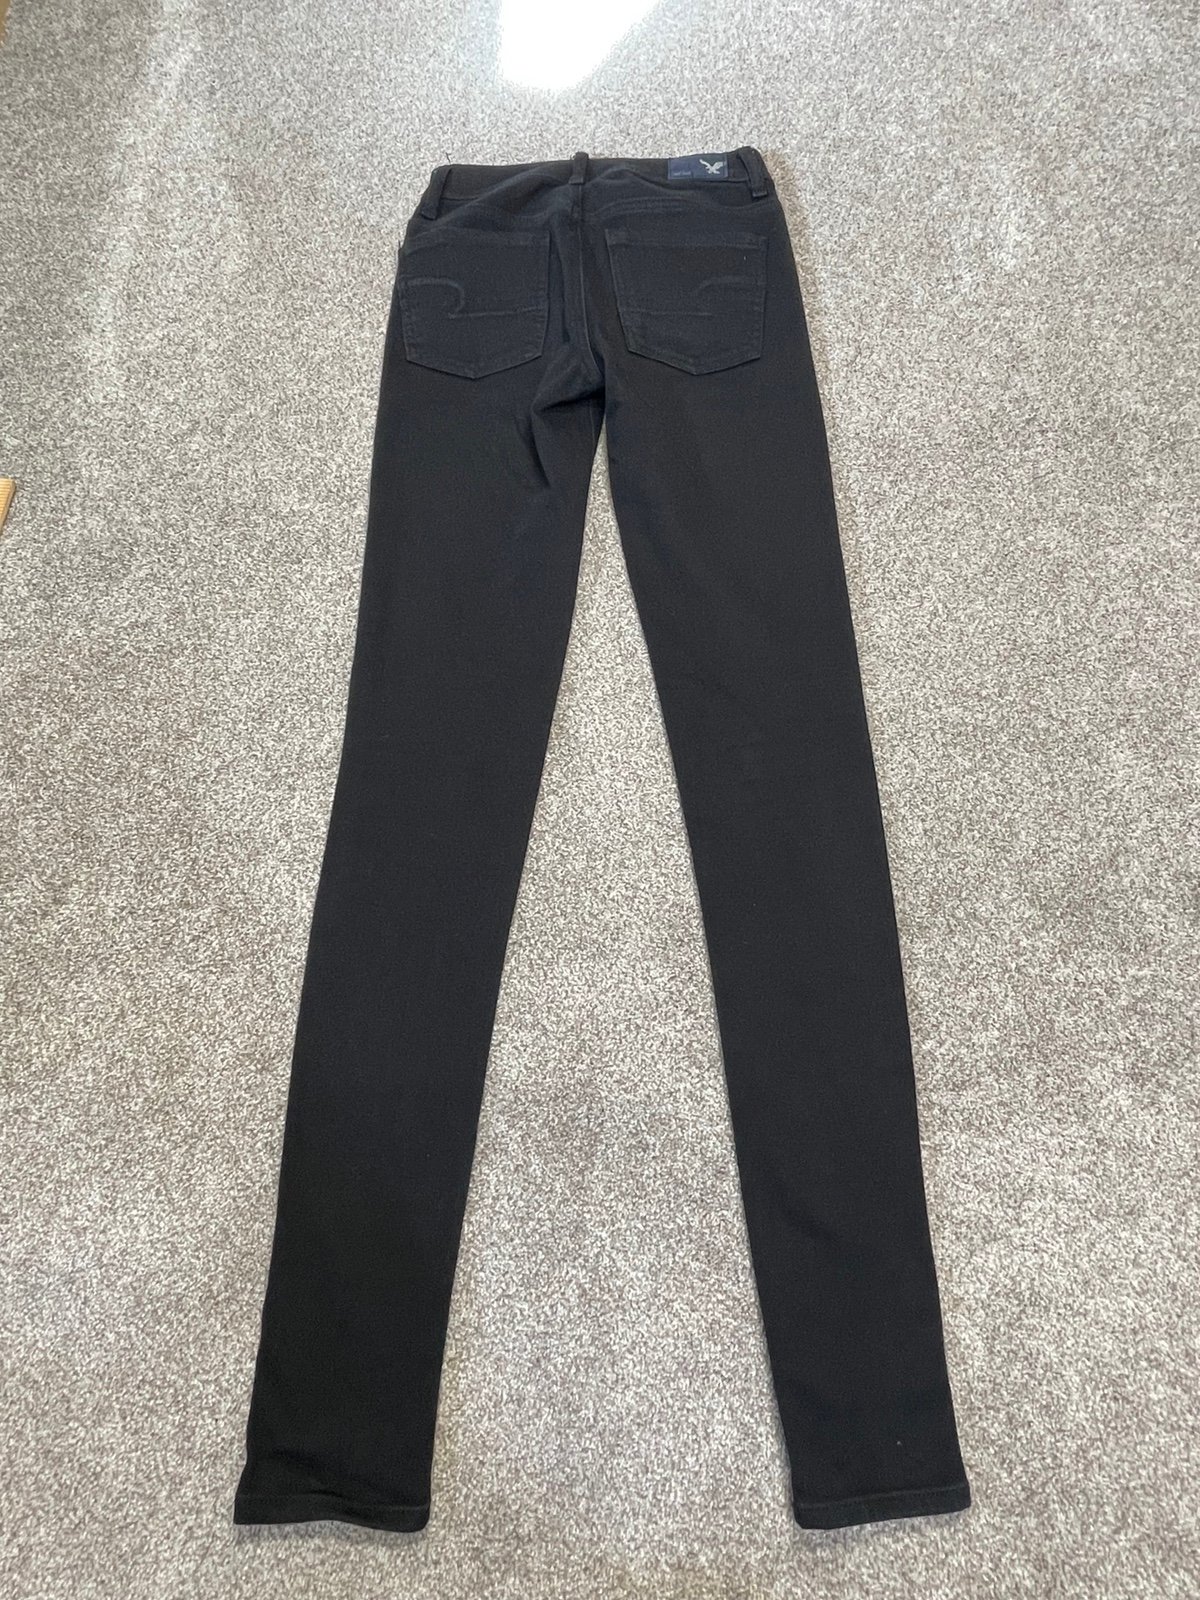 cheapest place to buy  American Eagle womens hi rise jegging jeans sz 0 extra Long black stretch denim mpUawUhOn Cheap